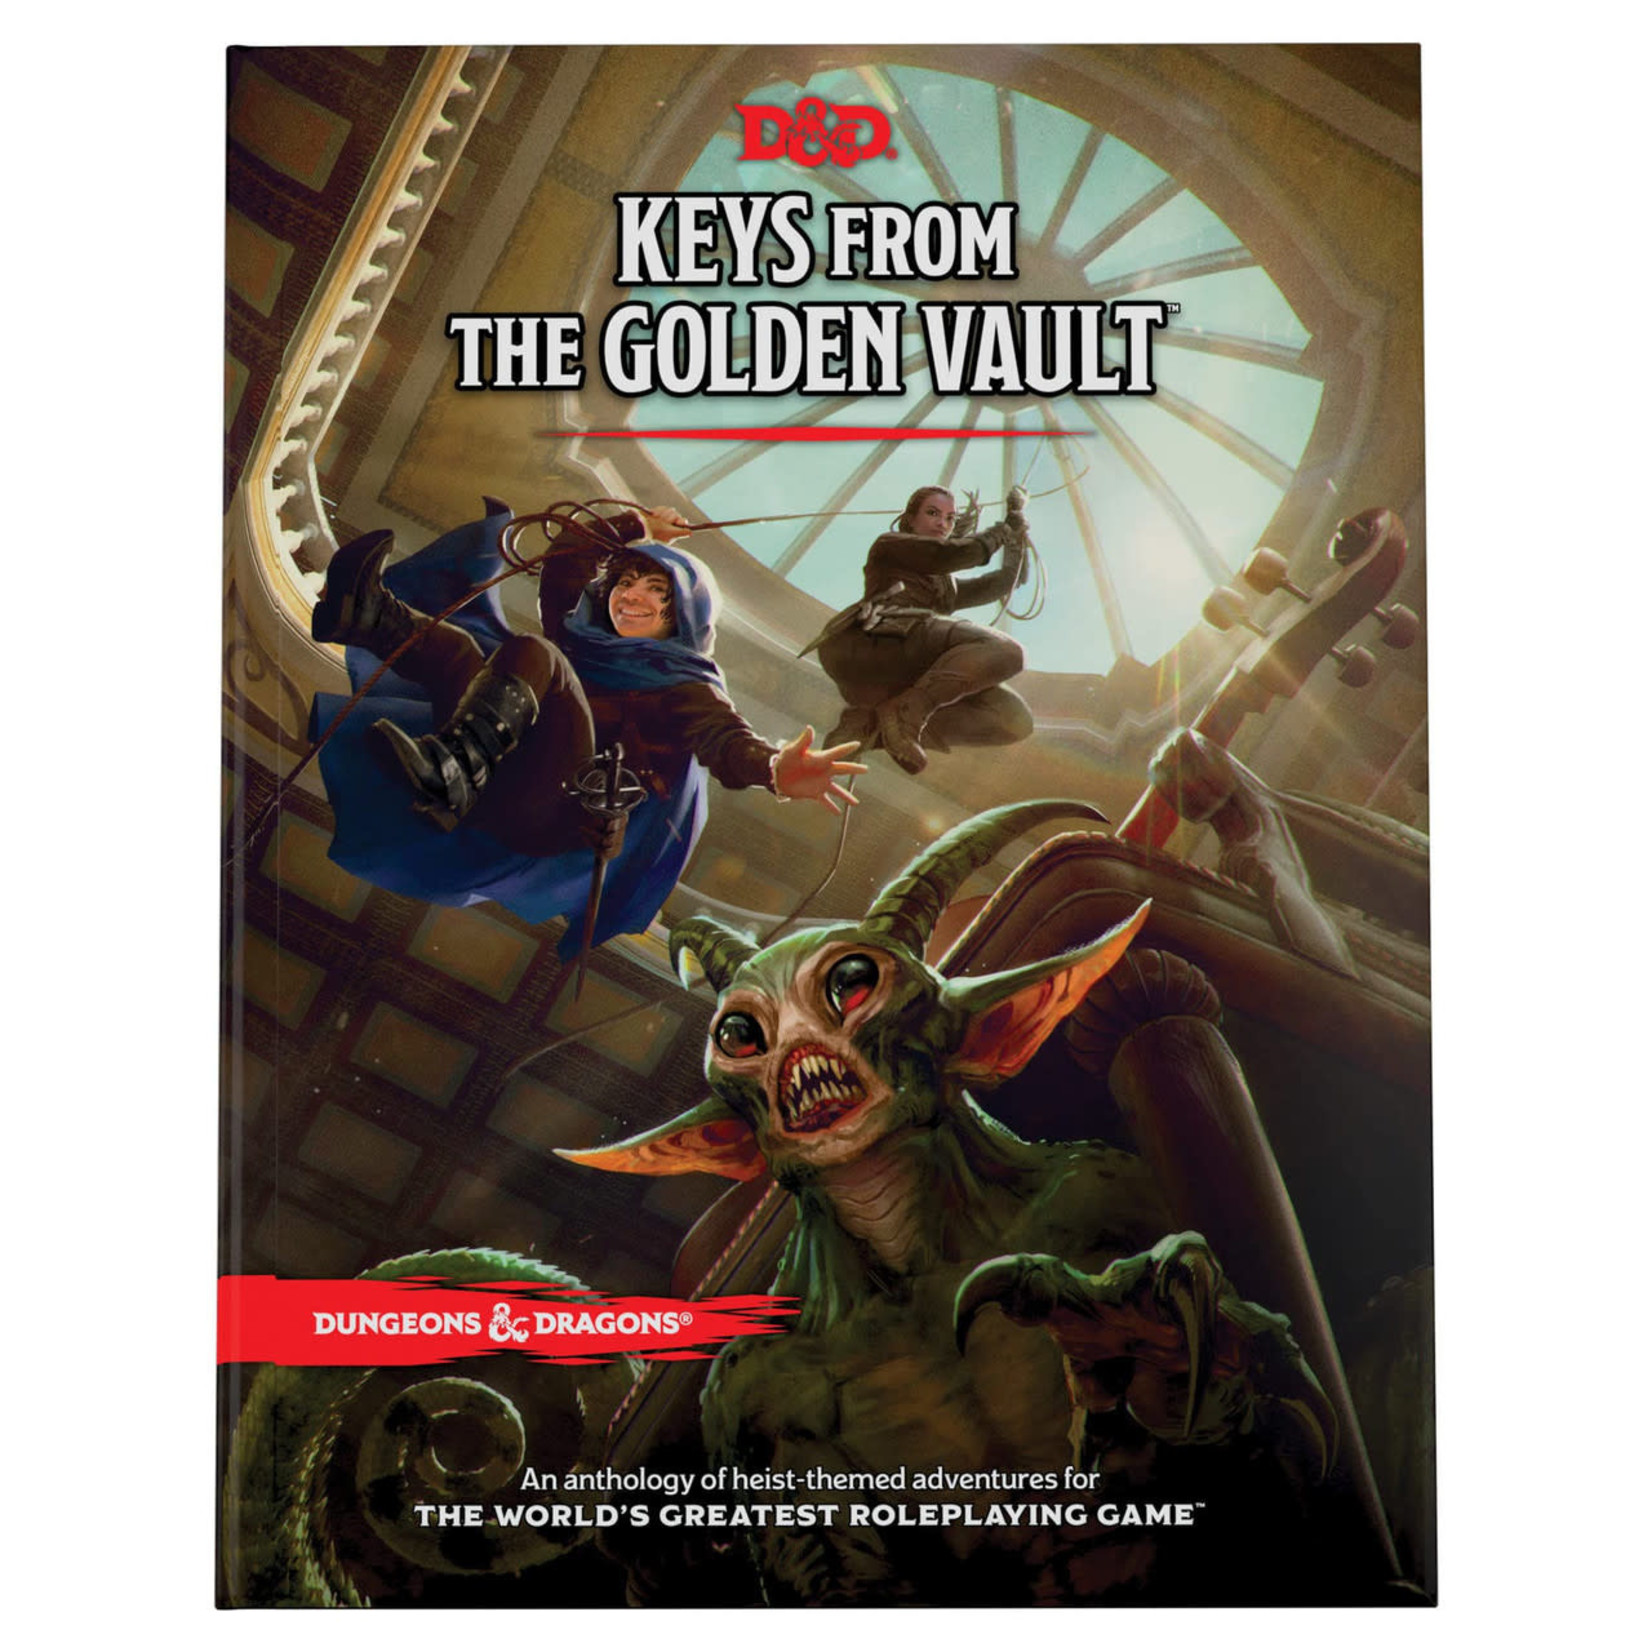 Wizards of the Coast Dungeons & Dragons RPG: Keys From the Golden Vault Hard Cover